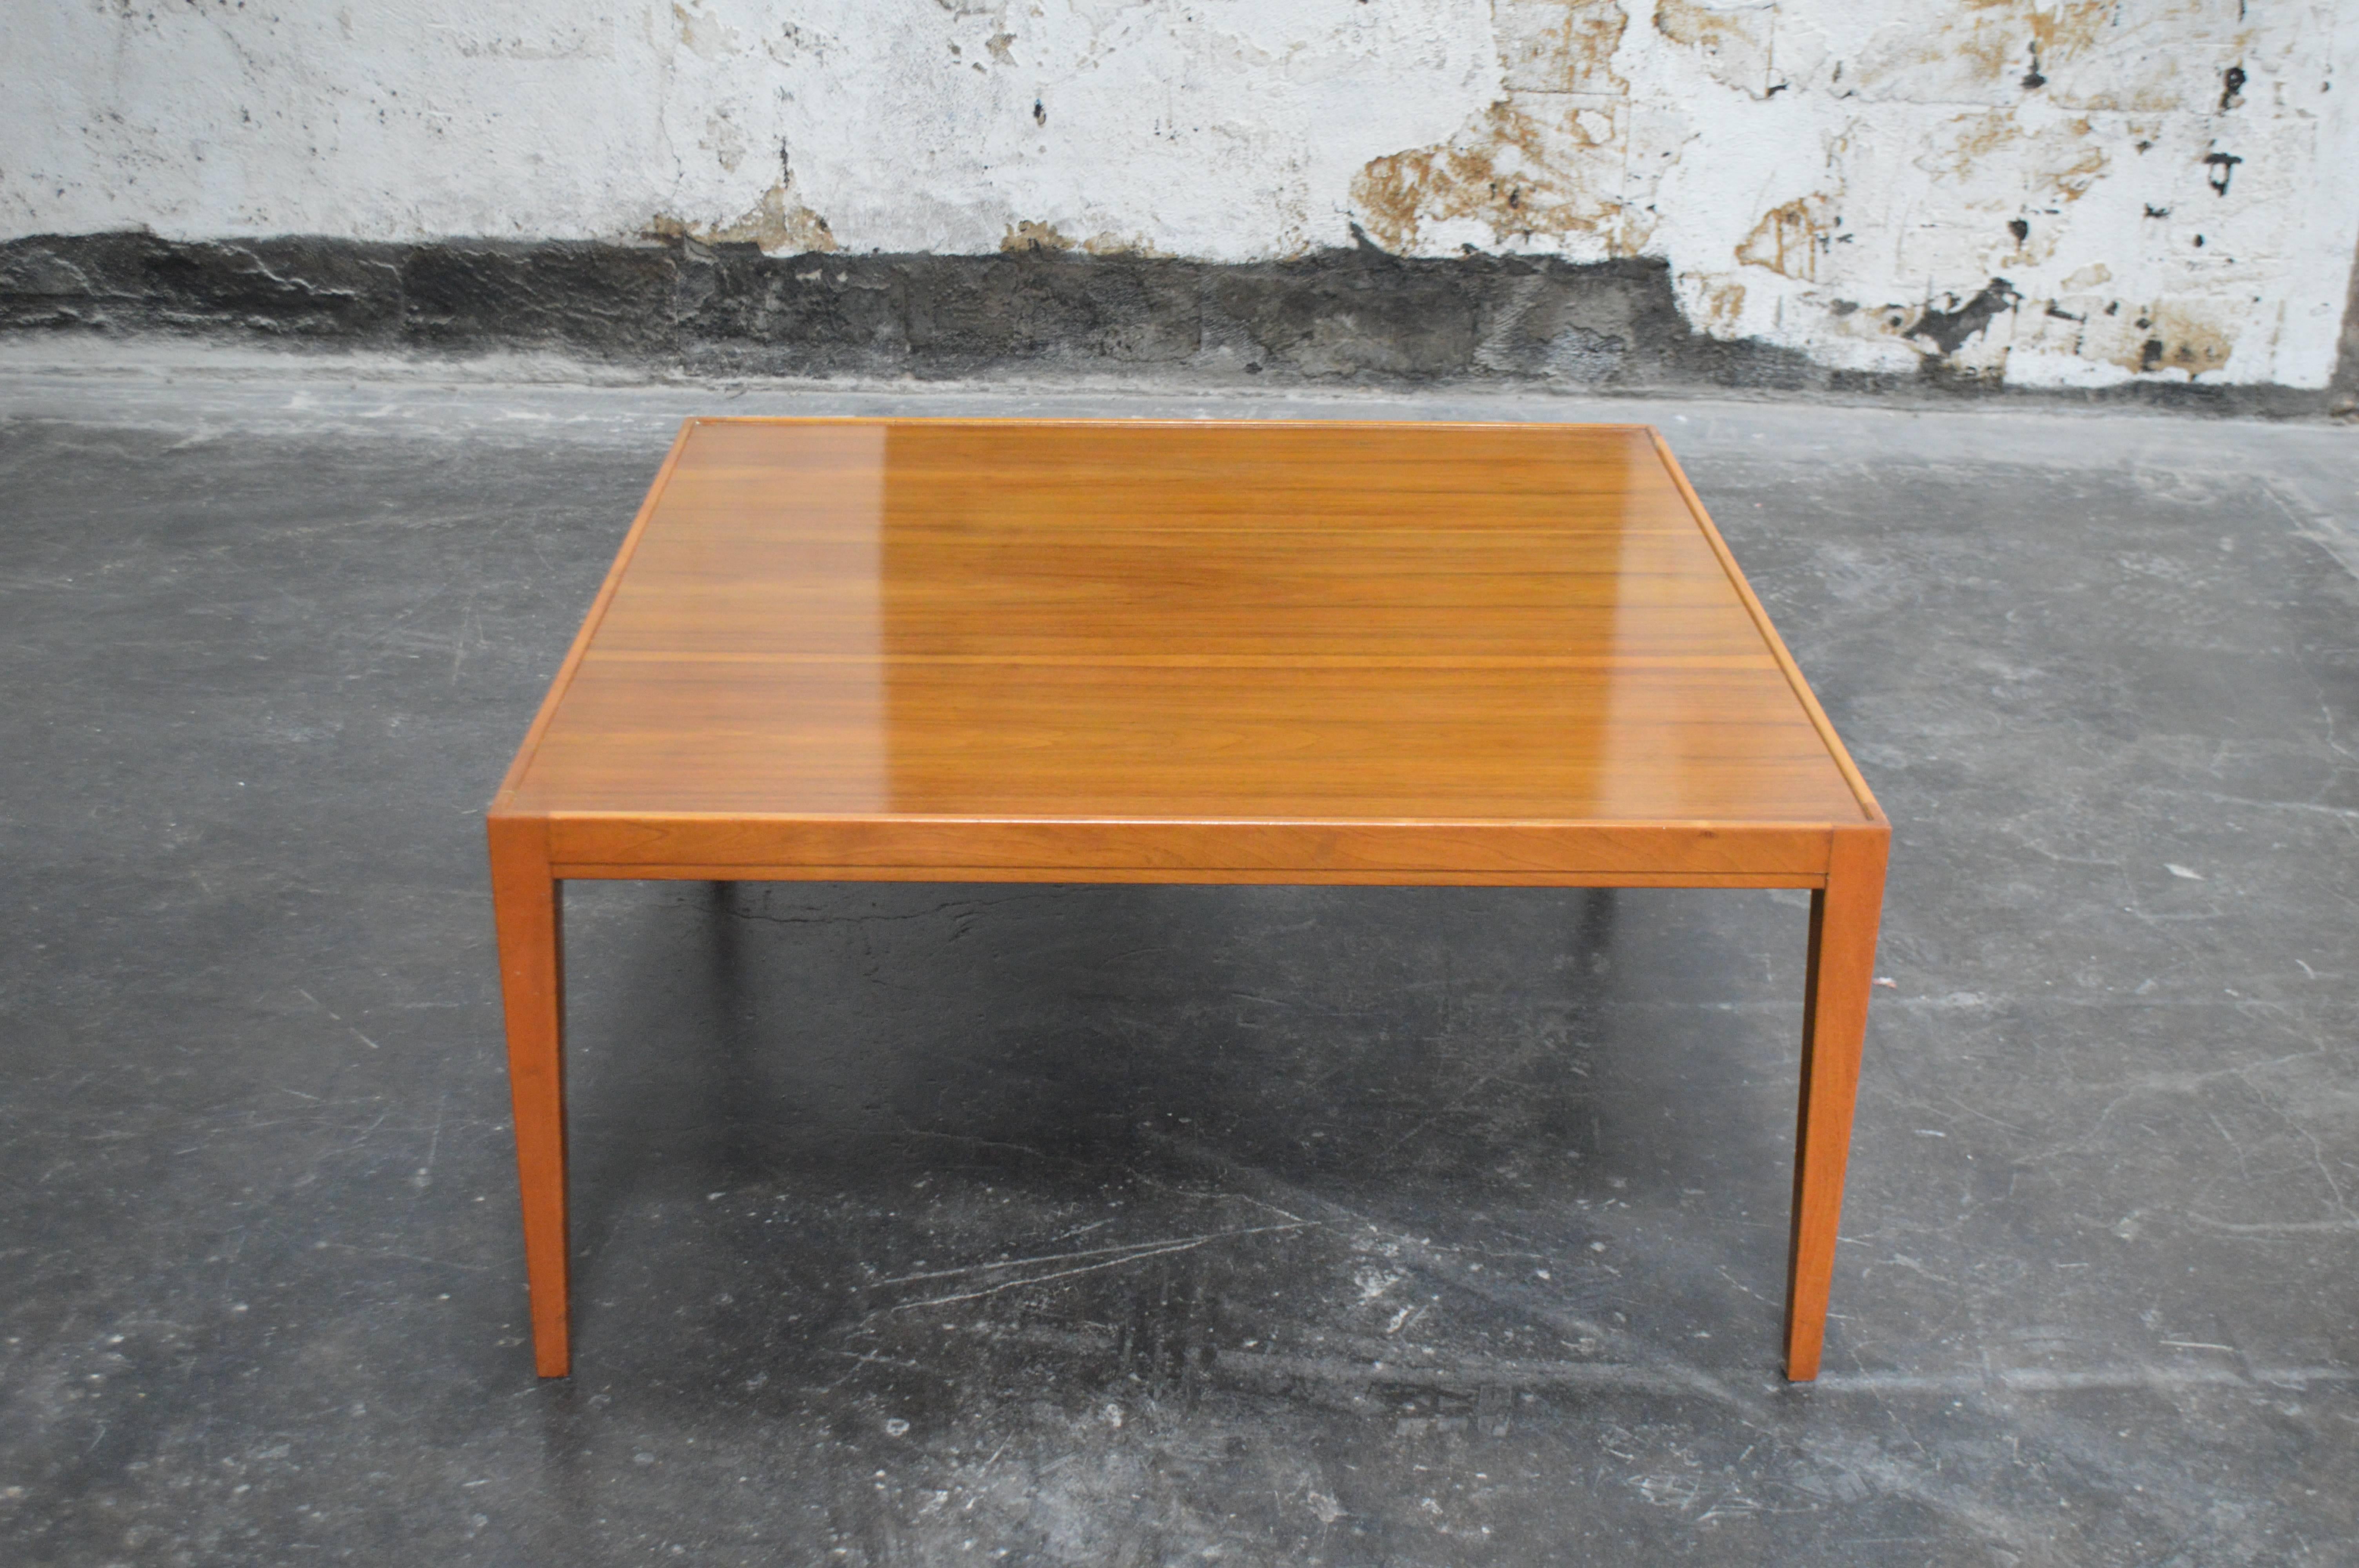 Sleek modern square coffee table with beautiful wood grain and atop tapered legs. Nice large size of 41.25